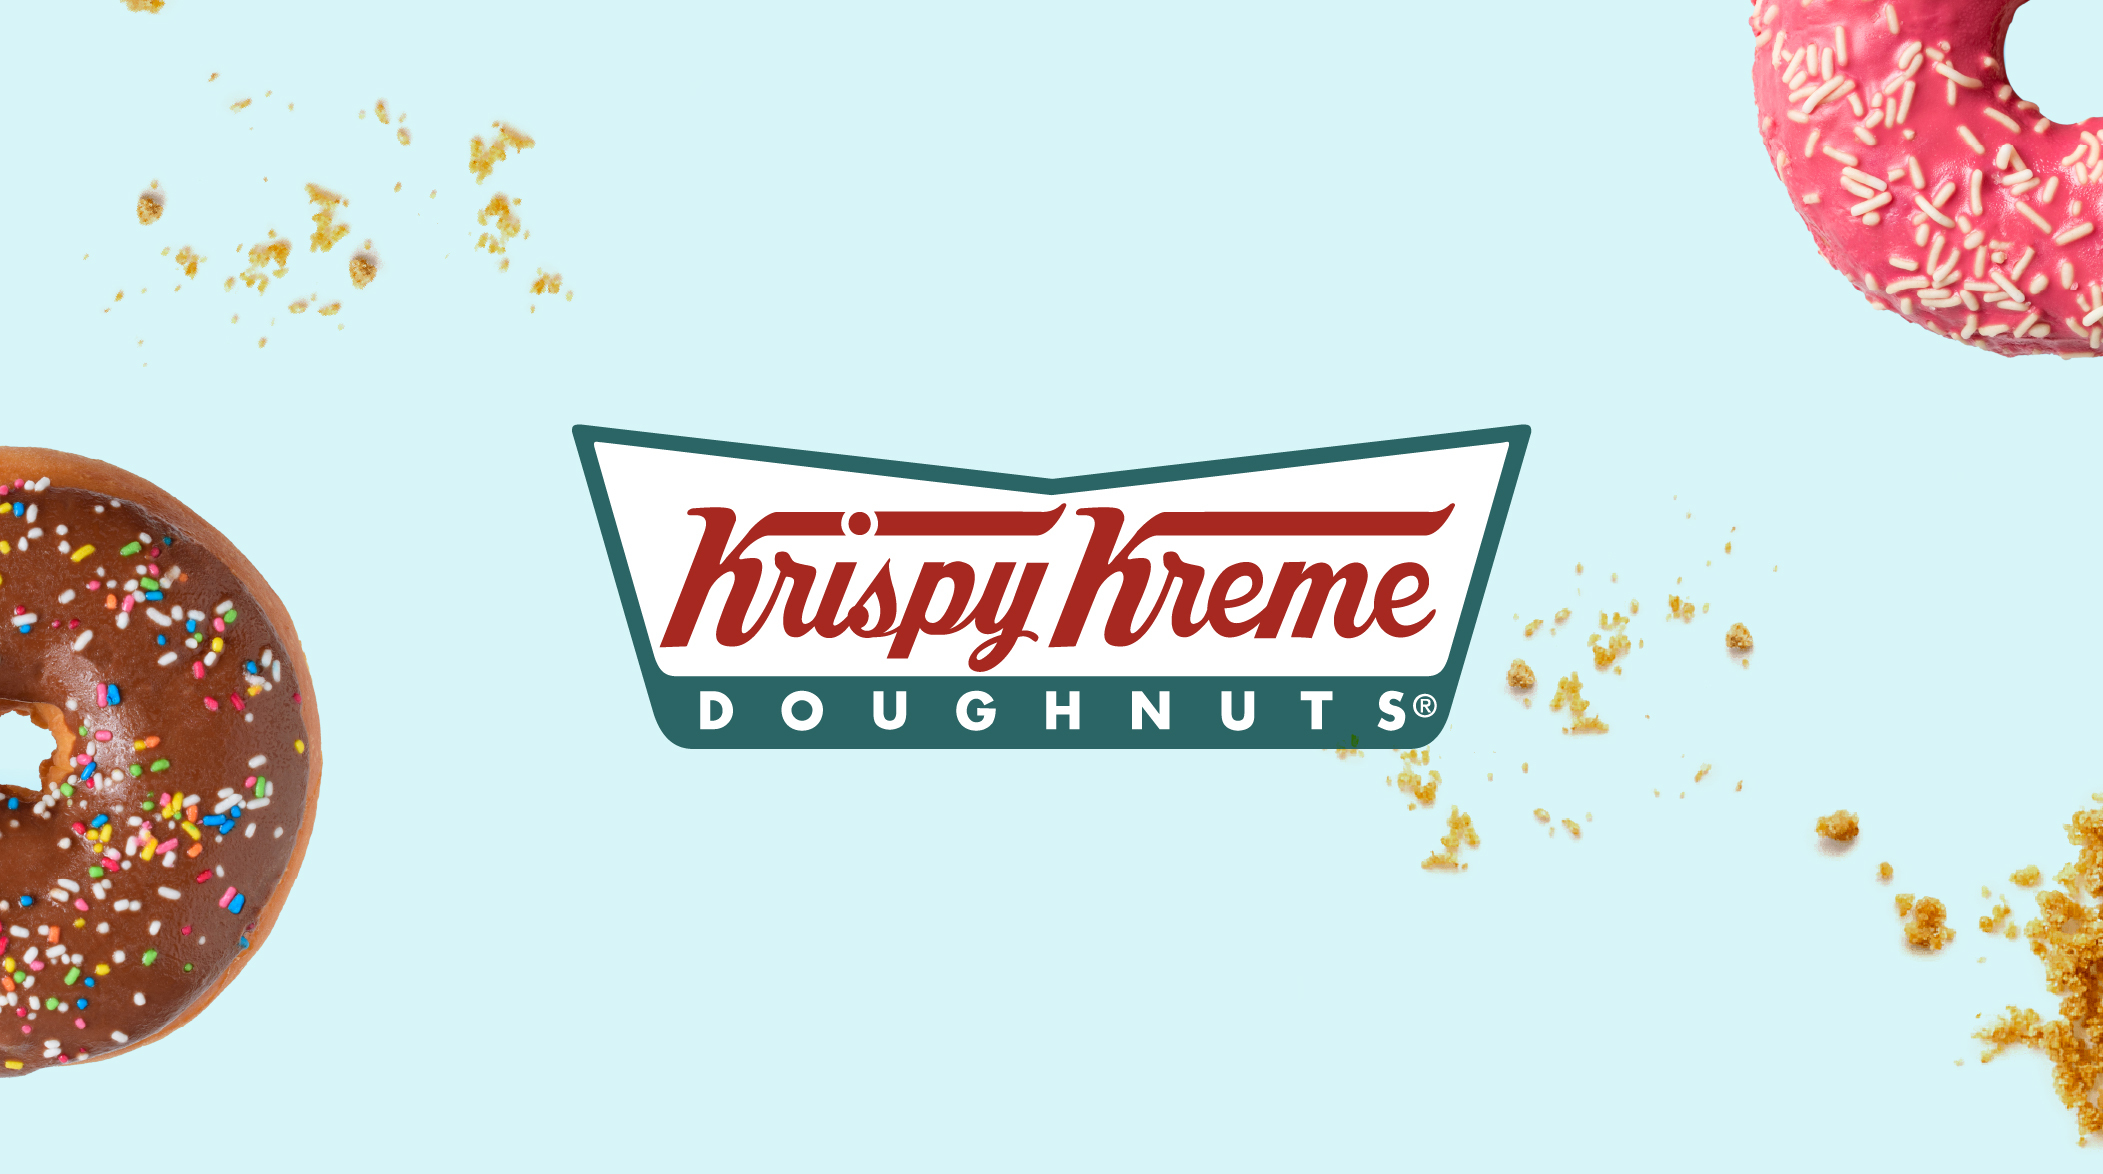 Krispy Kreme gains nearly 24% on IPO - Bamboo - Invest and Trade in US Stocks - Nigeria - Ghana - Kenya - South Africa - Africa